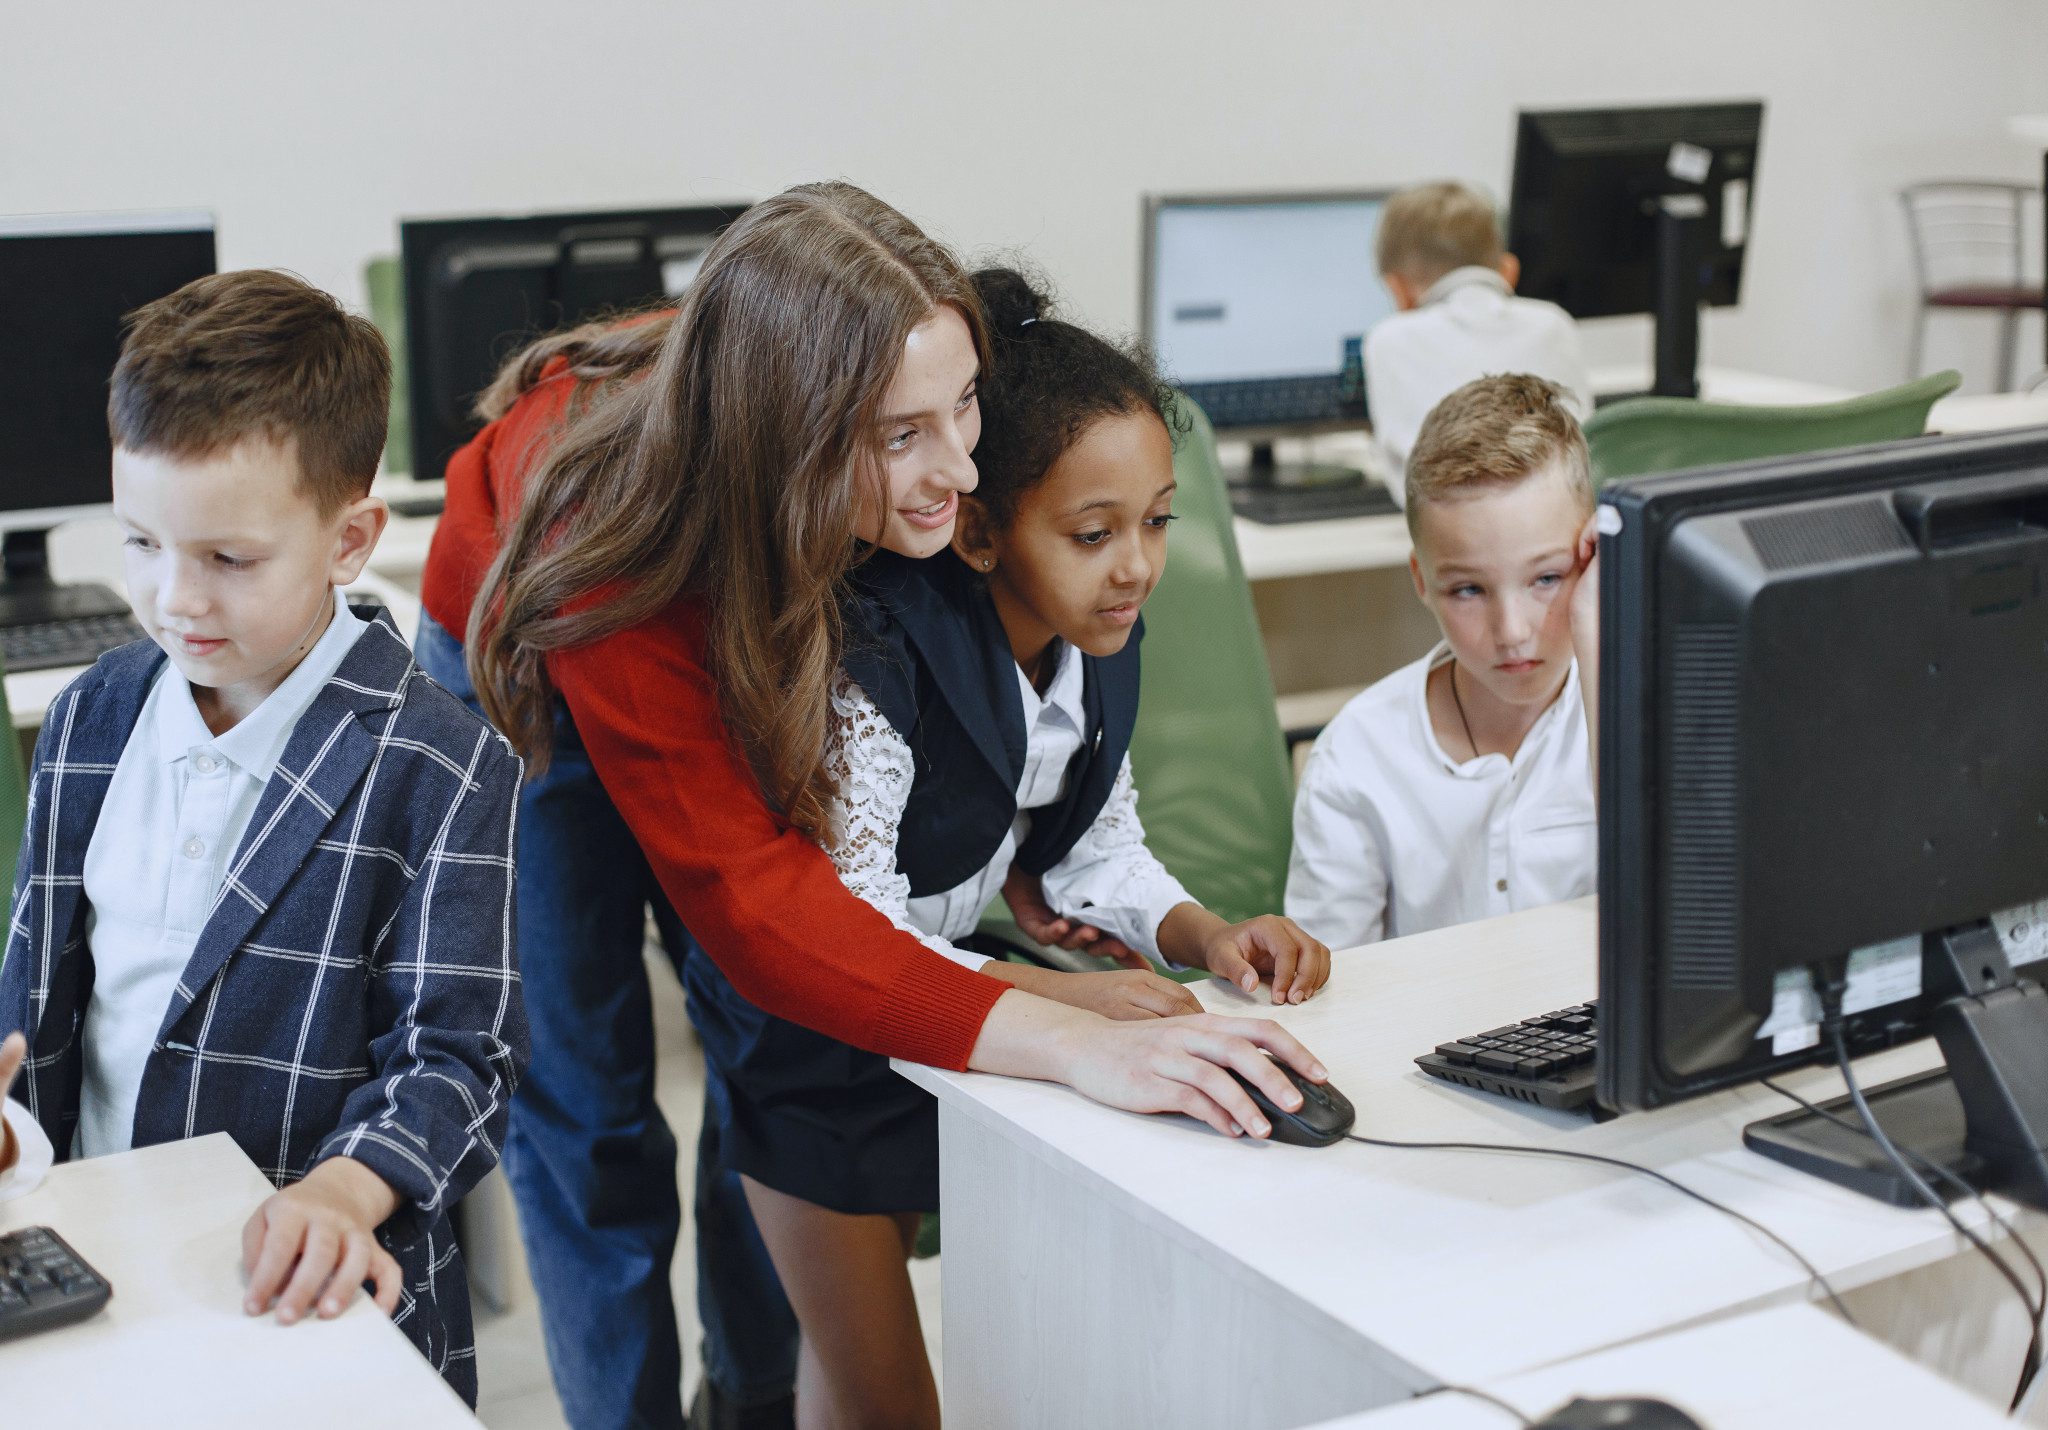 5 activities to teach digital citizenship to students